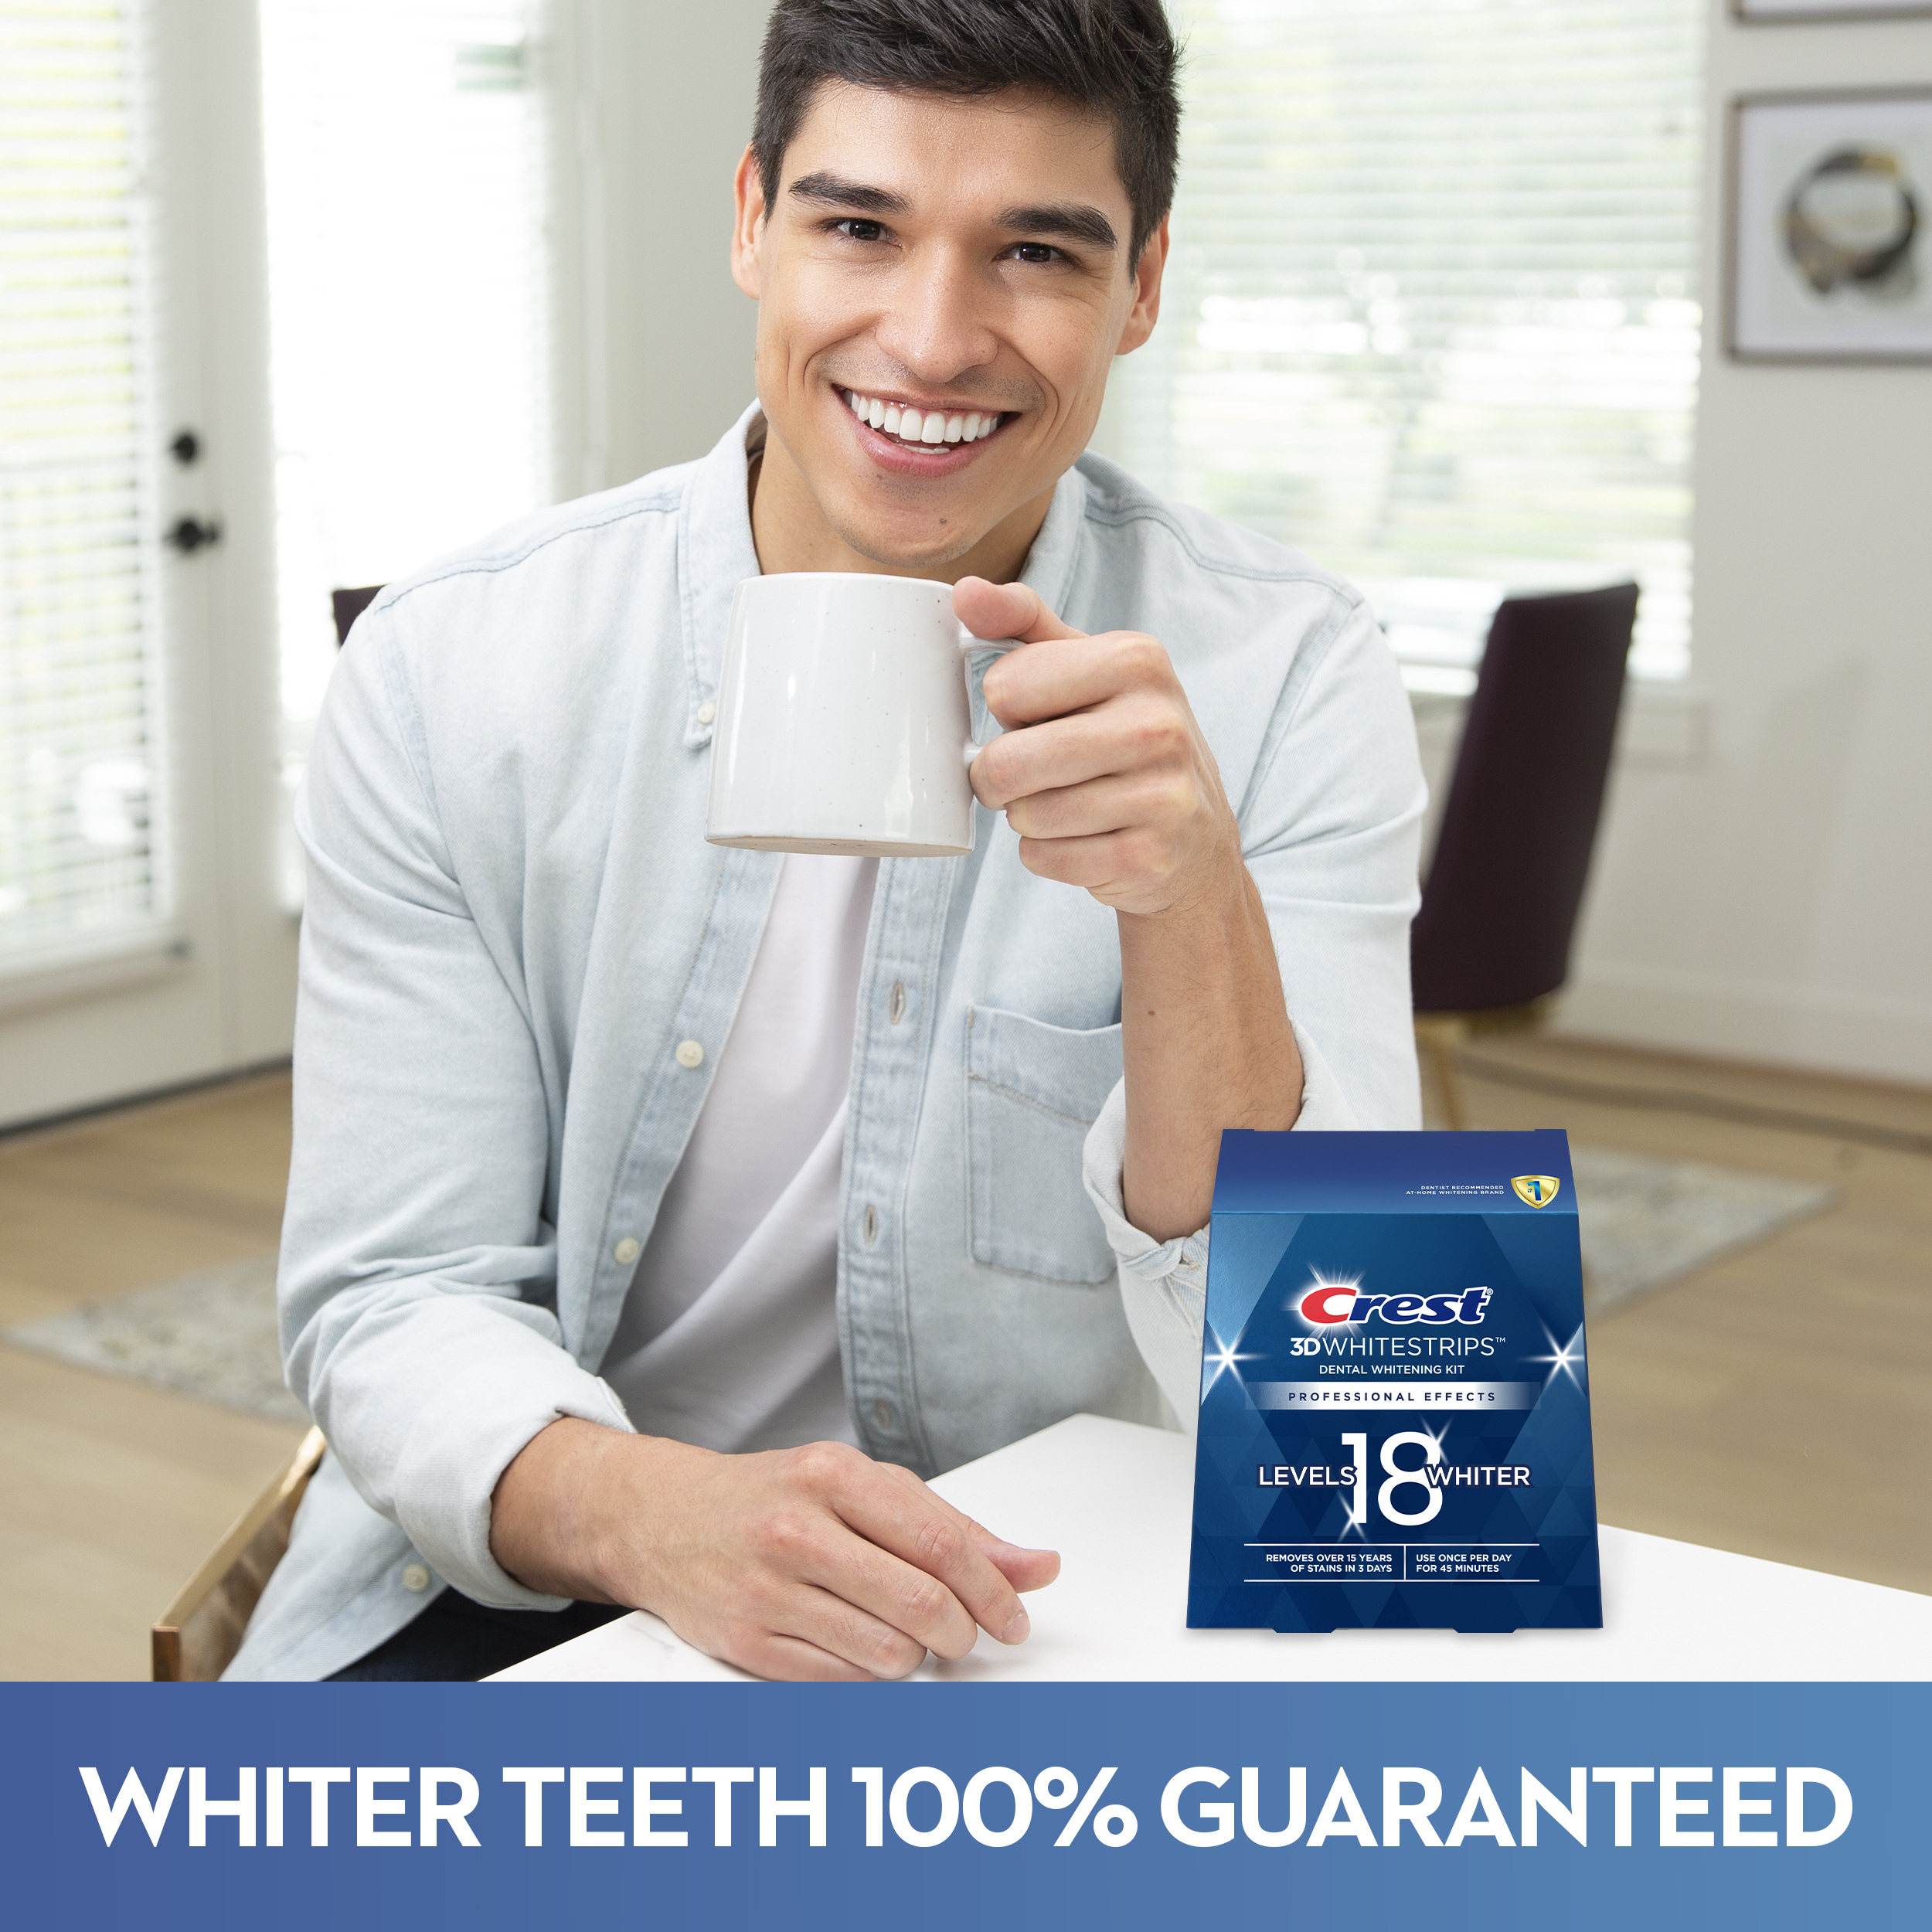 Crest 3D Whitestrips Professional Effects Teeth Whitening Strips Kit, 20 Treatments - image 2 of 6